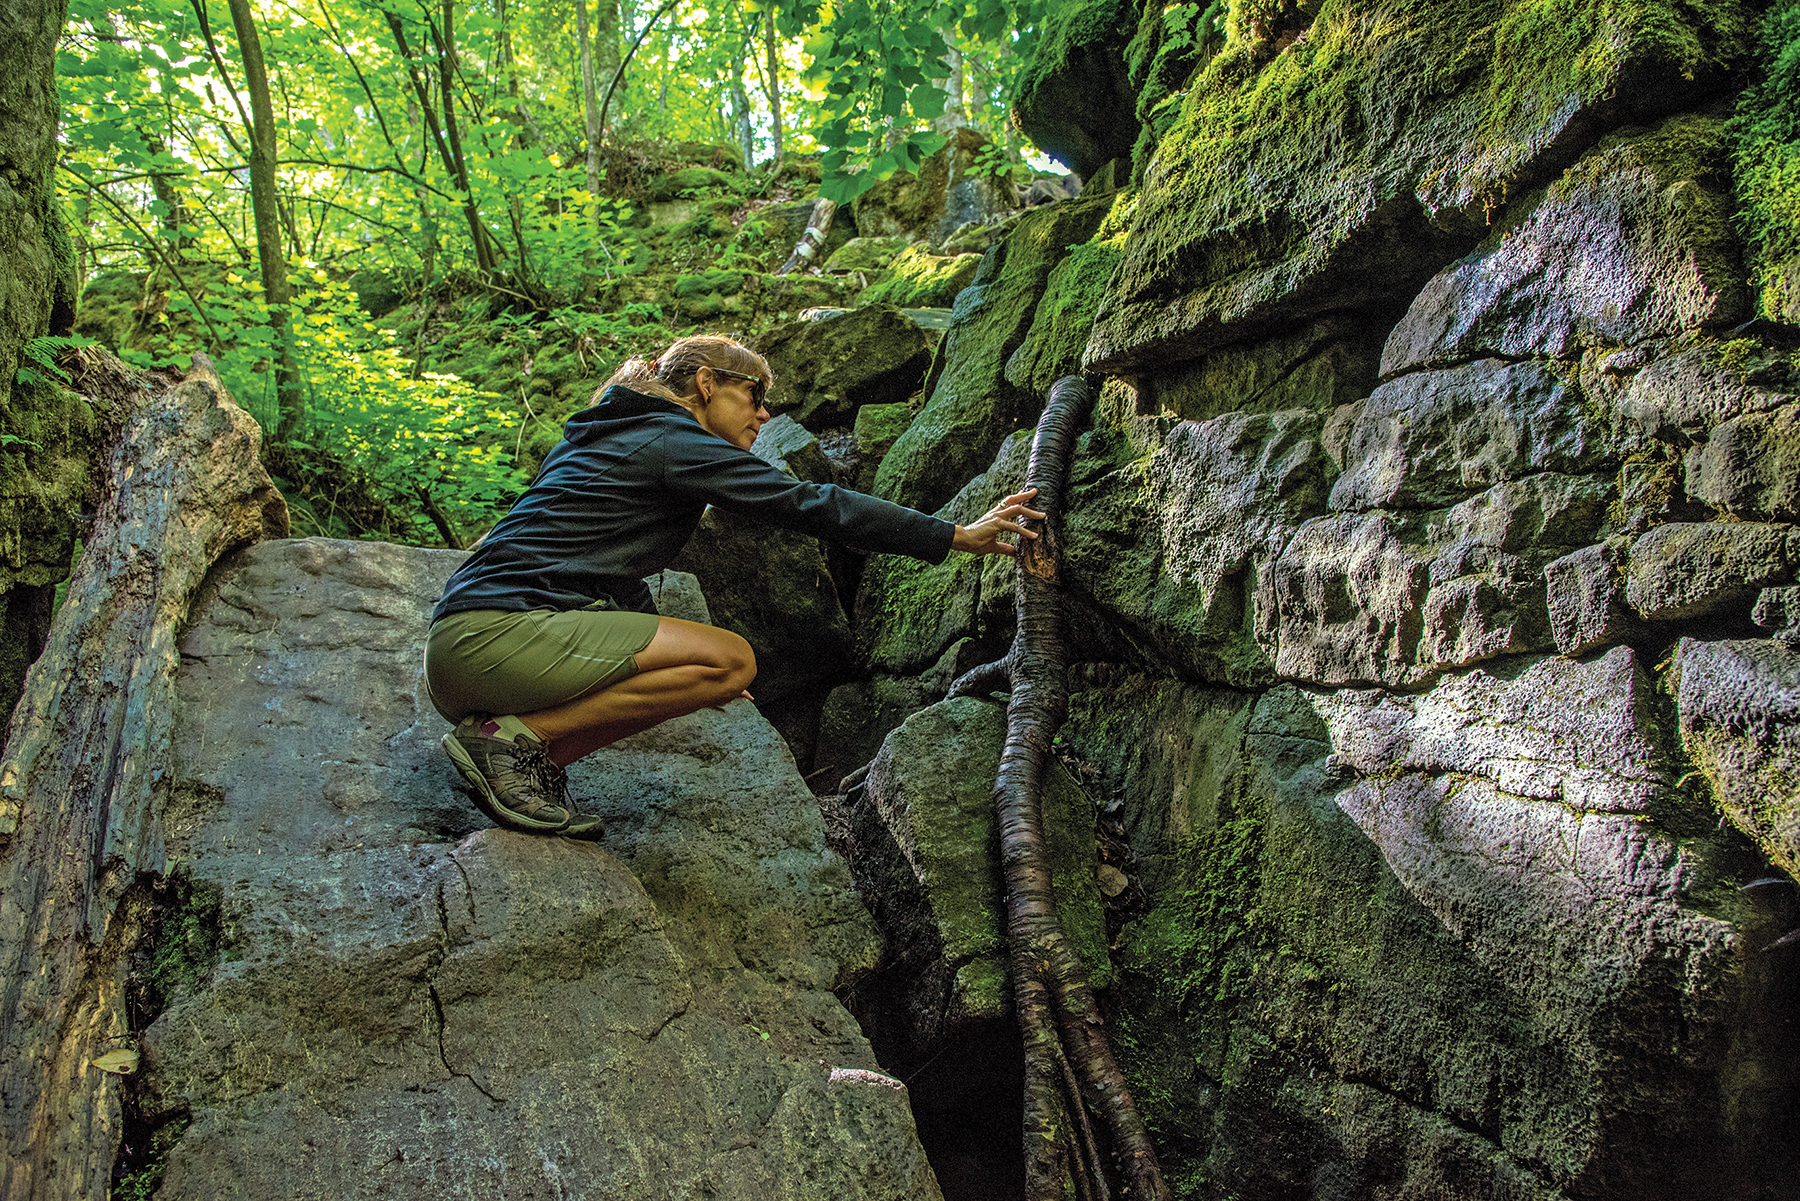 Morag Nieuwold examines a tree root that seemingly sprouts from the rockface, anchoring a large birch tree in place in the Singhampton Caves.